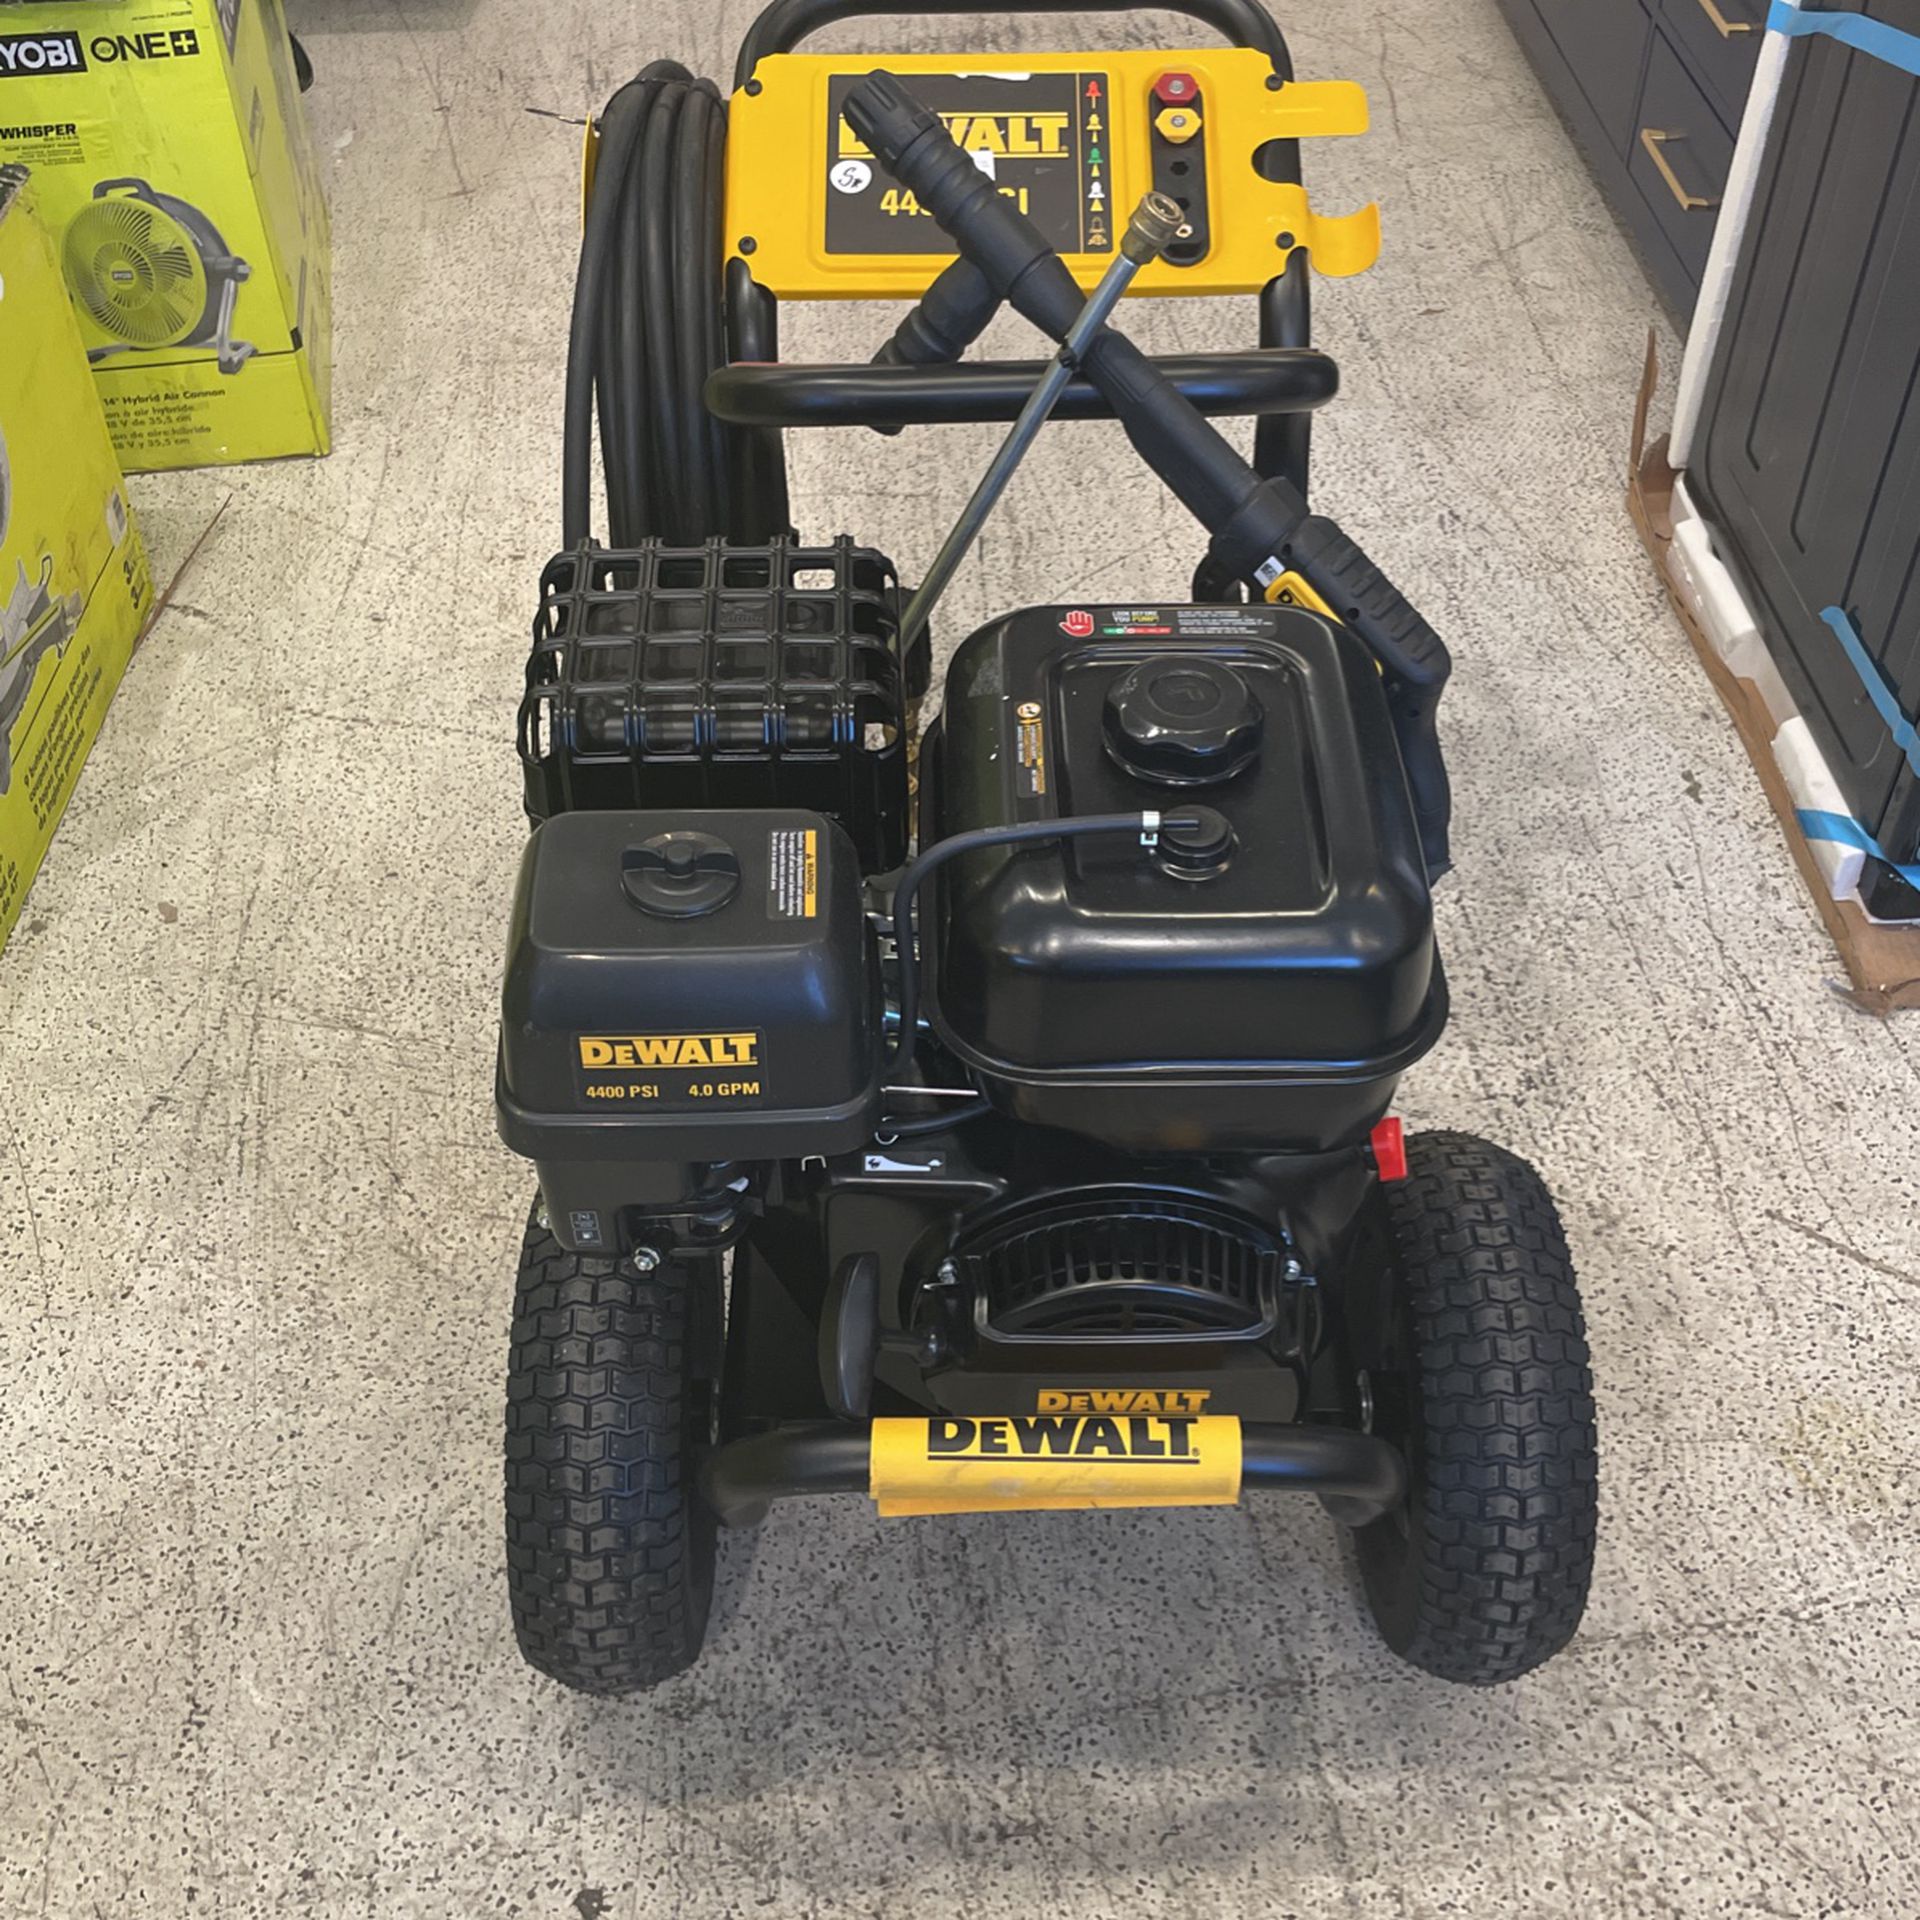 DEWALT 4400 psi 4.0 GPM Gas Cold Water Pressure Washer with 420cc Engine 49 State….DXPW61377